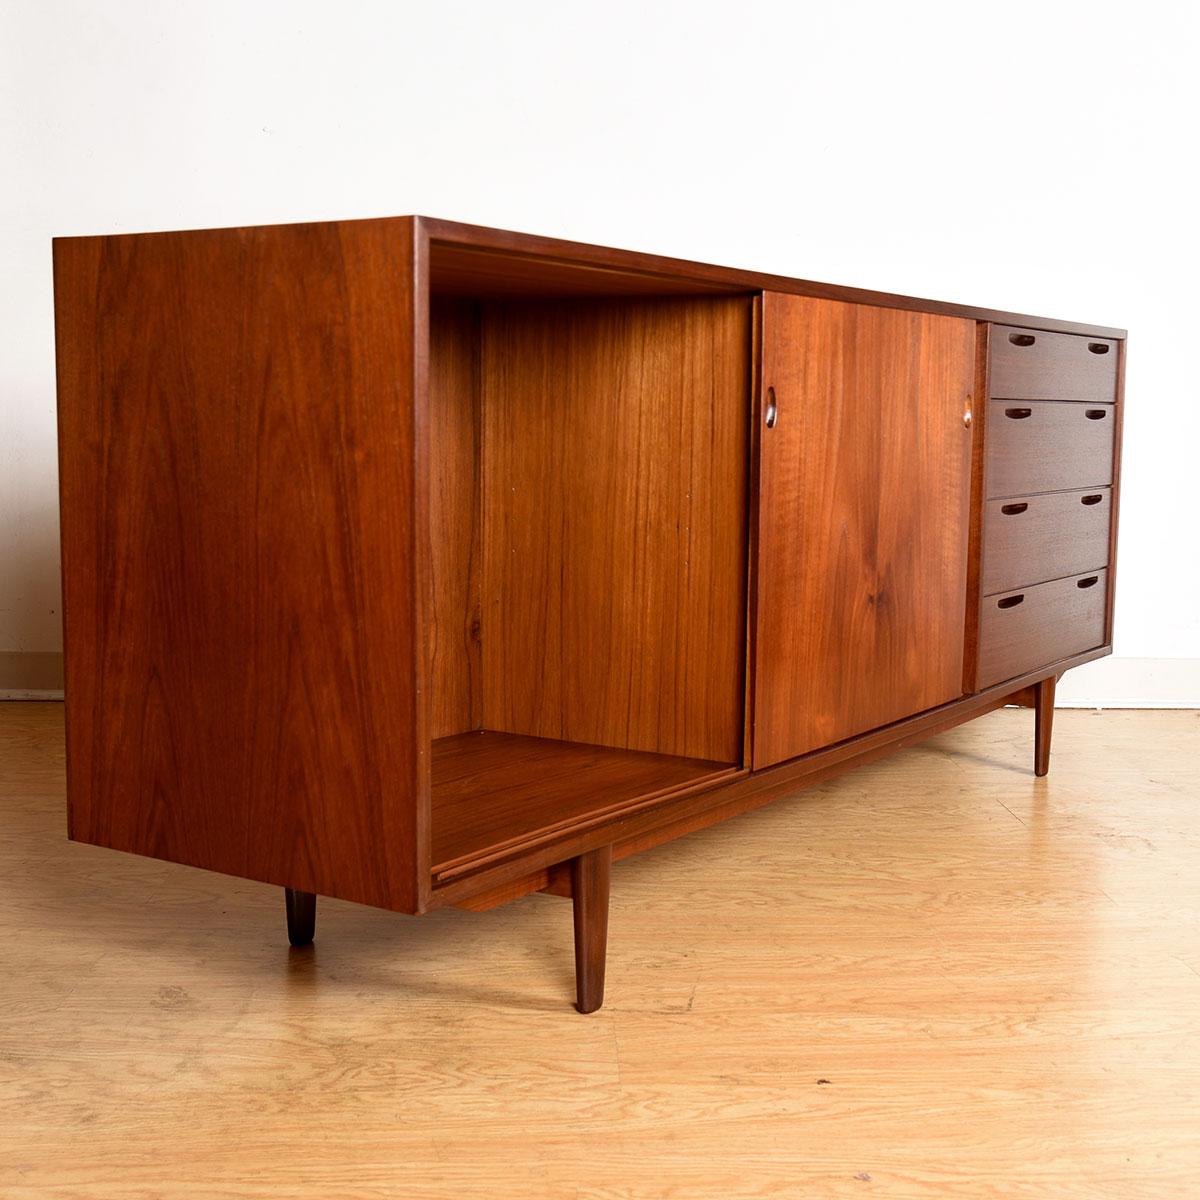 Stunning Danish modern credenza in deep dark teak by Kofod-Larsen.
Column of drawers on the far right, each having two narrow slits framed in darker teak for pulls.

Two sliding doors open to cabinet storage with an open bay on the left.
Stretcher